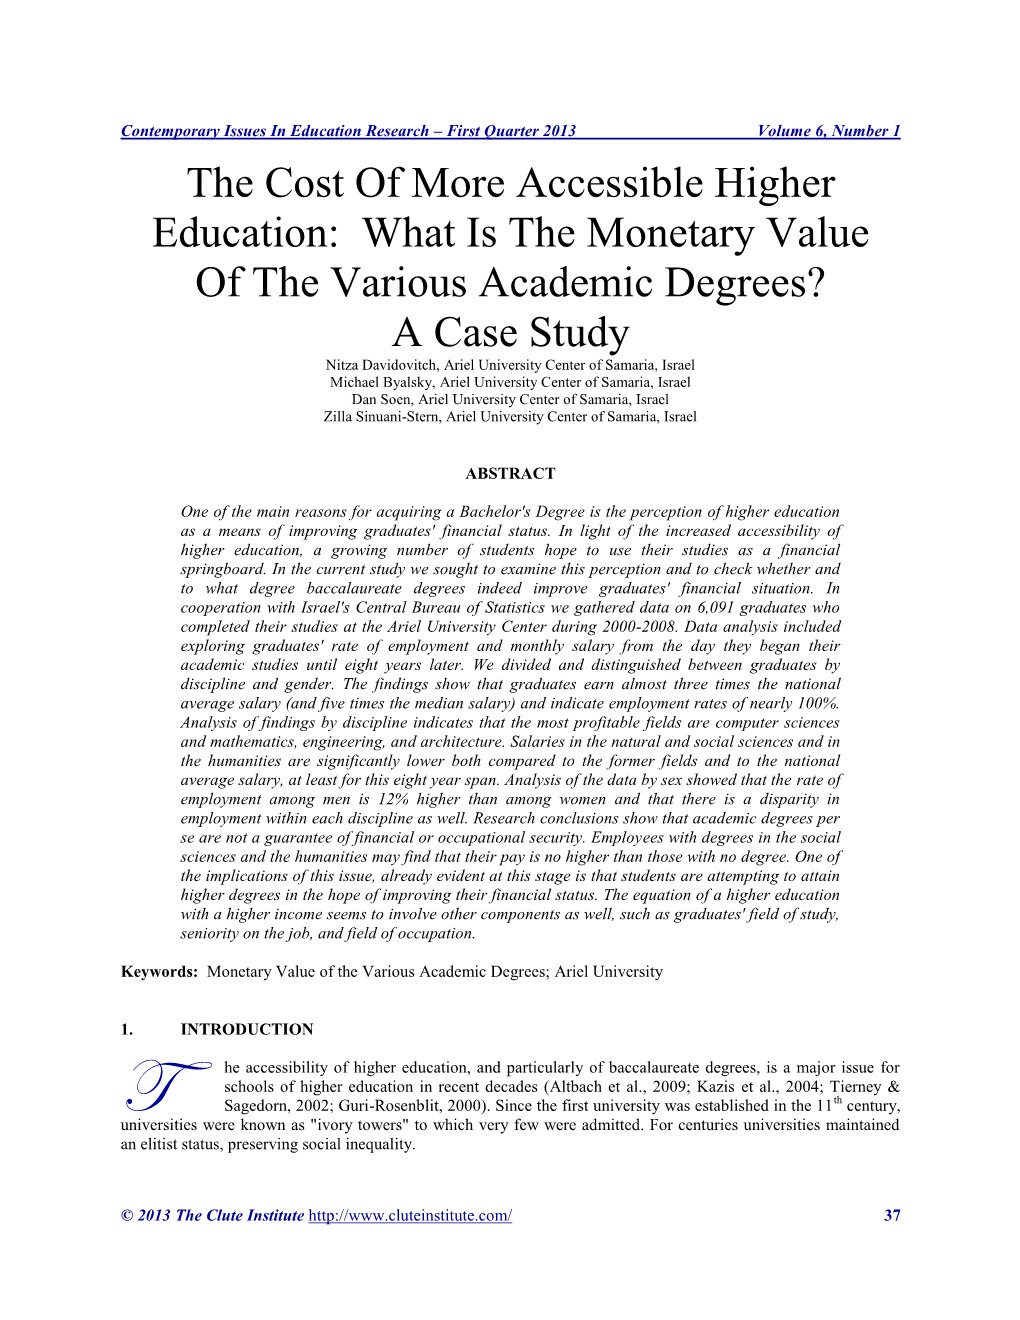 The Cost of More Accessible Higher Education: What Is the Monetary